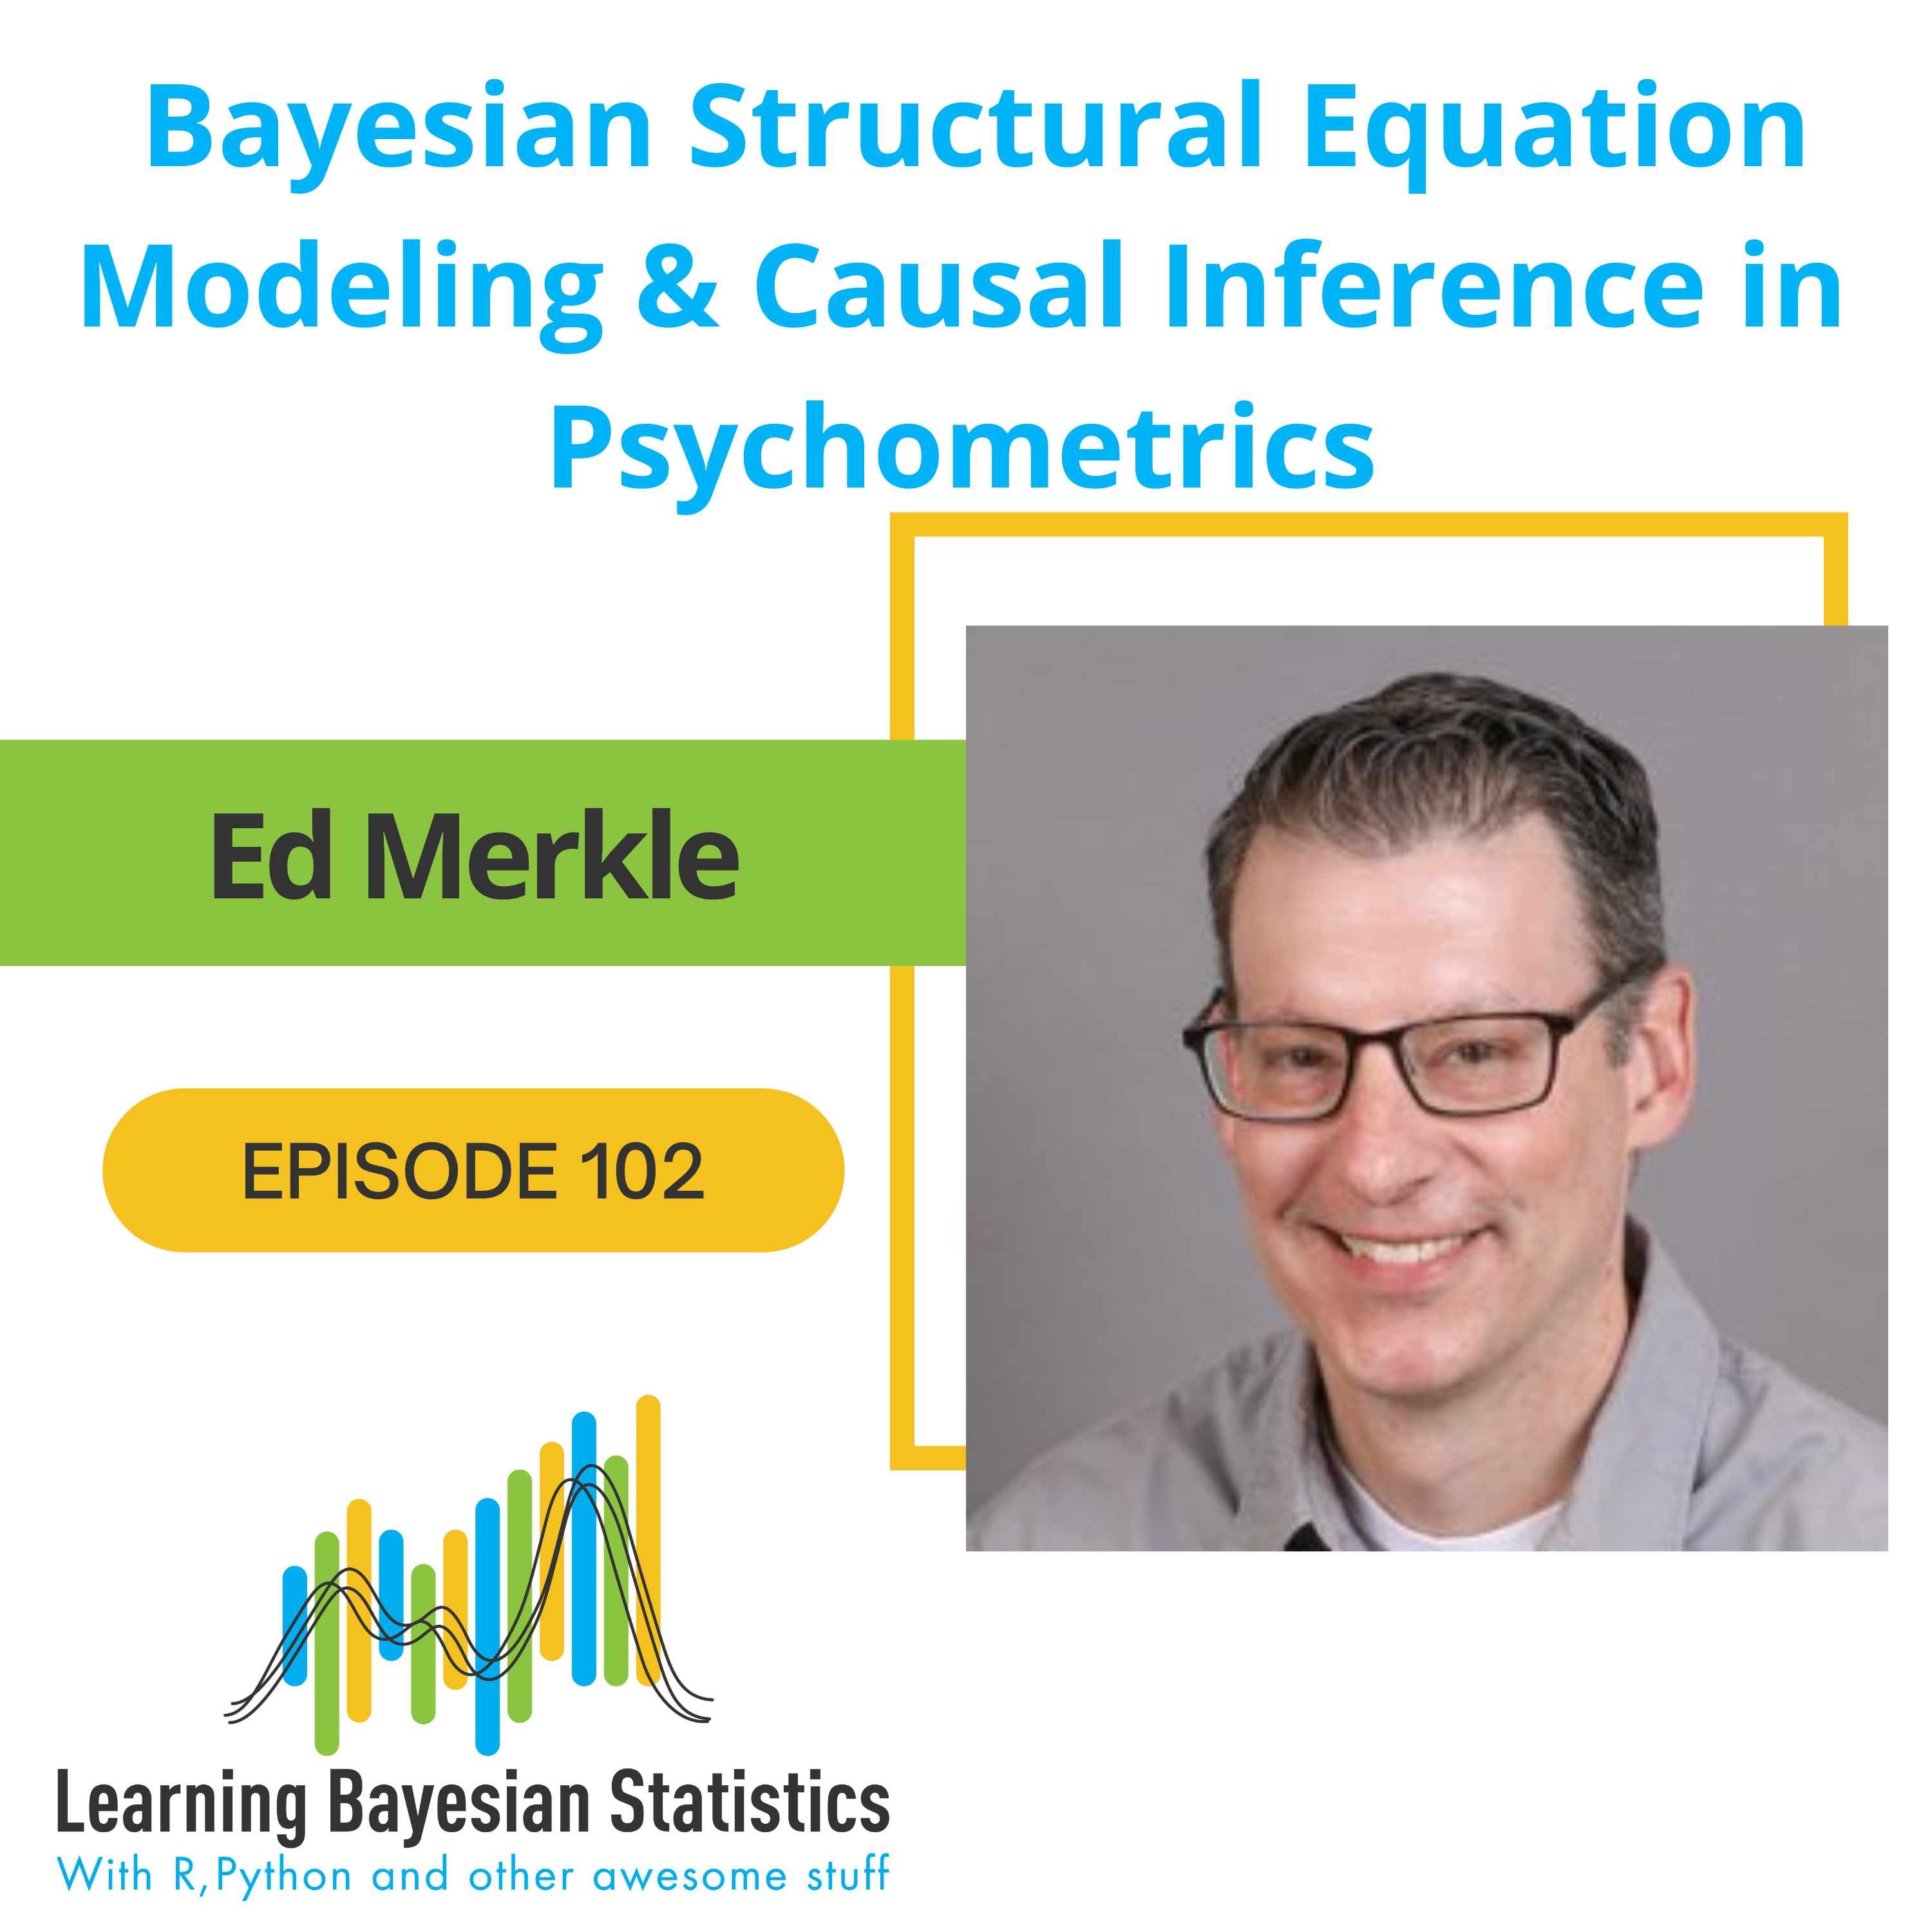 #102 Bayesian Structural Equation Modeling & Causal Inference in Psychometrics, with Ed Merkle